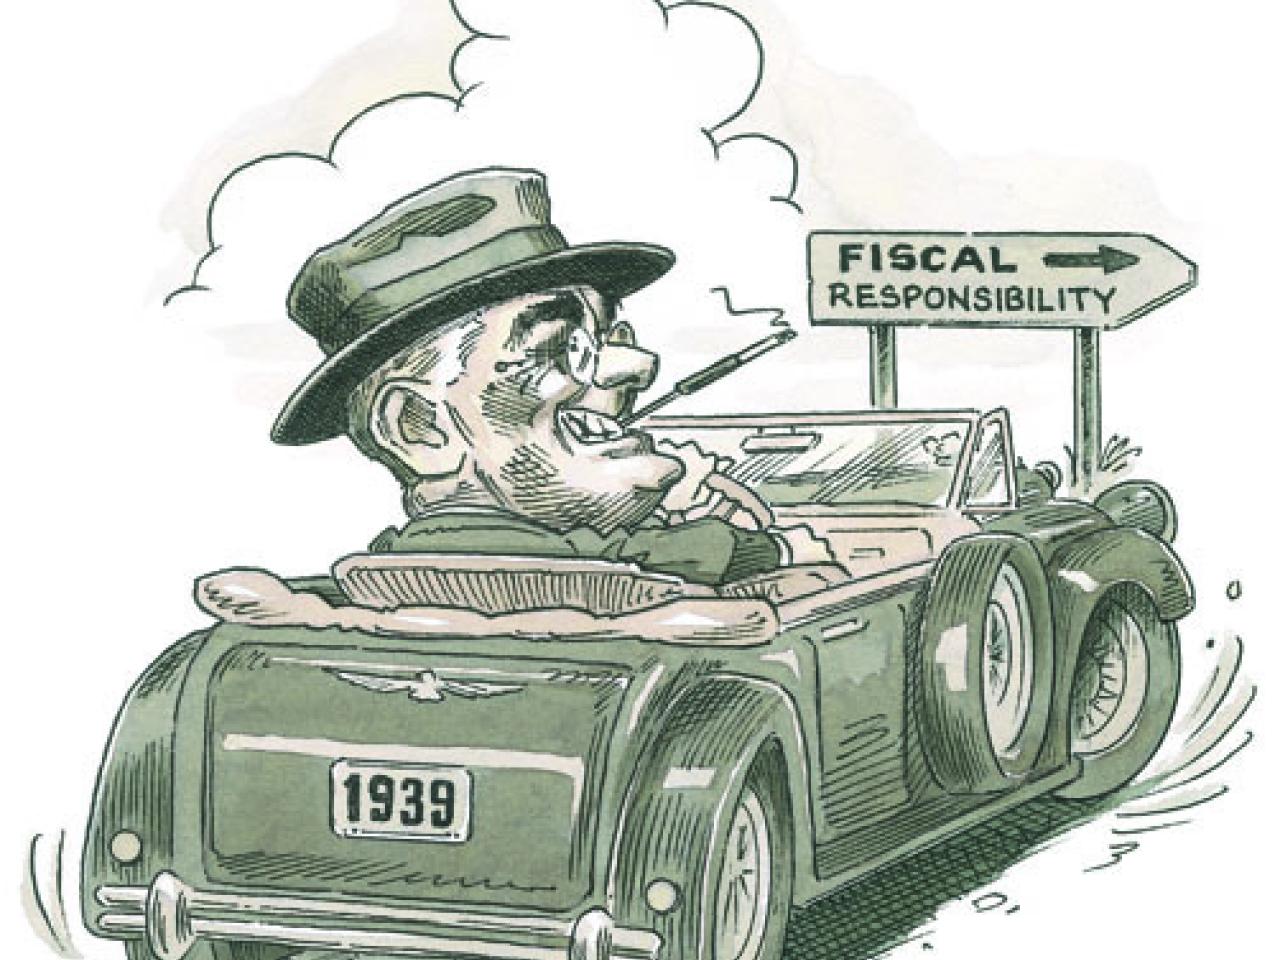 Fiscal responsiblity